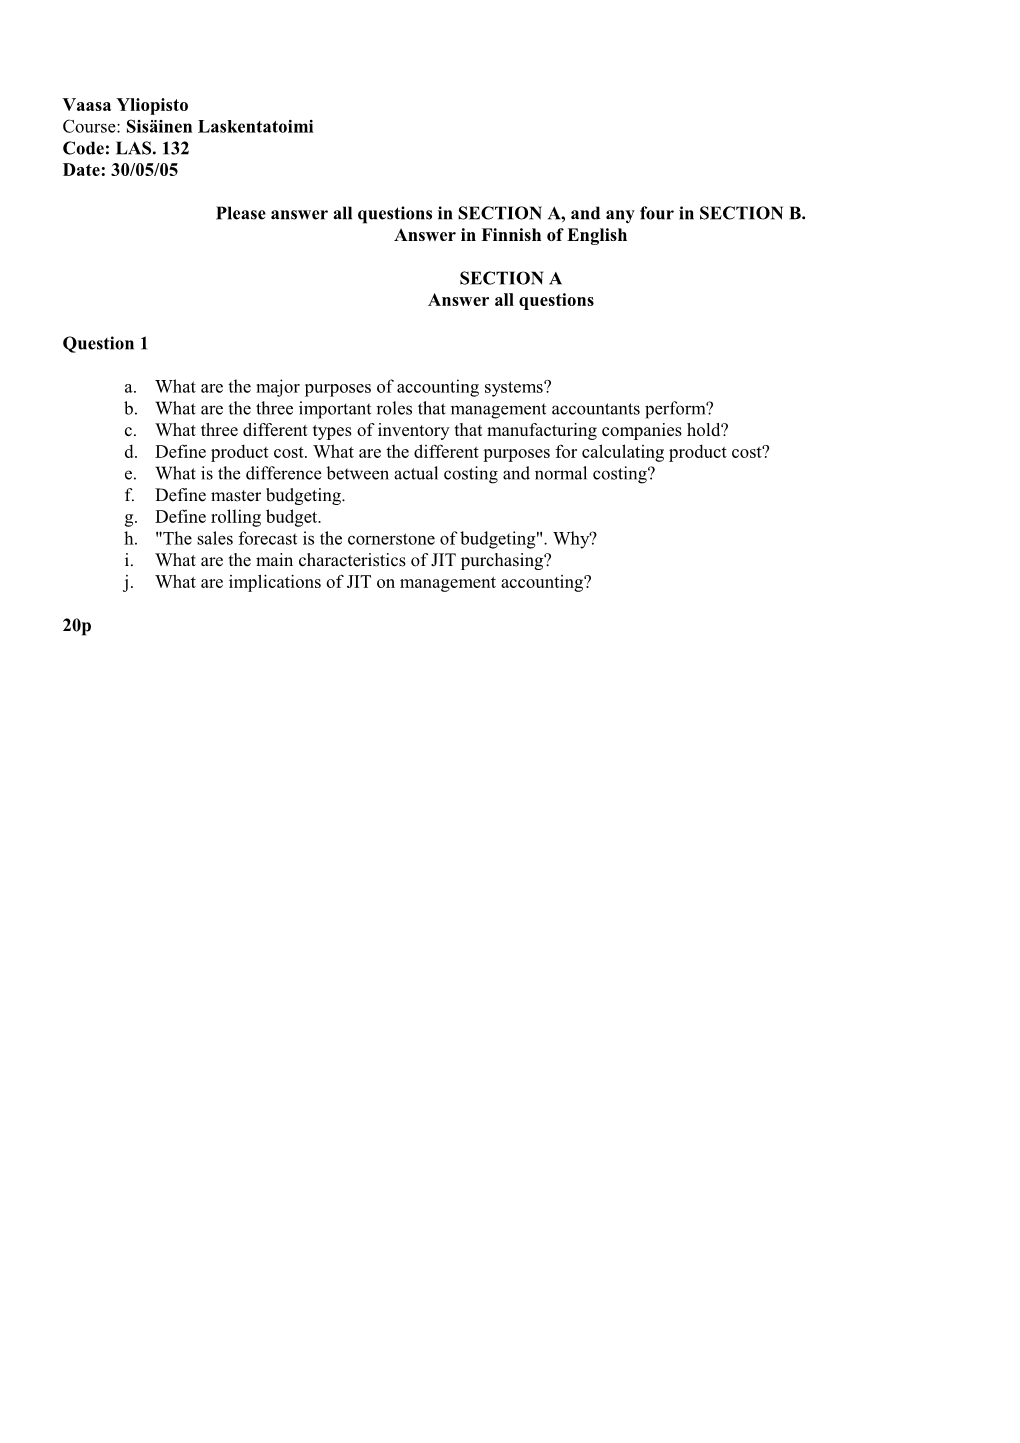 Please Answer All Questions in SECTION A, and Any Four in SECTION B